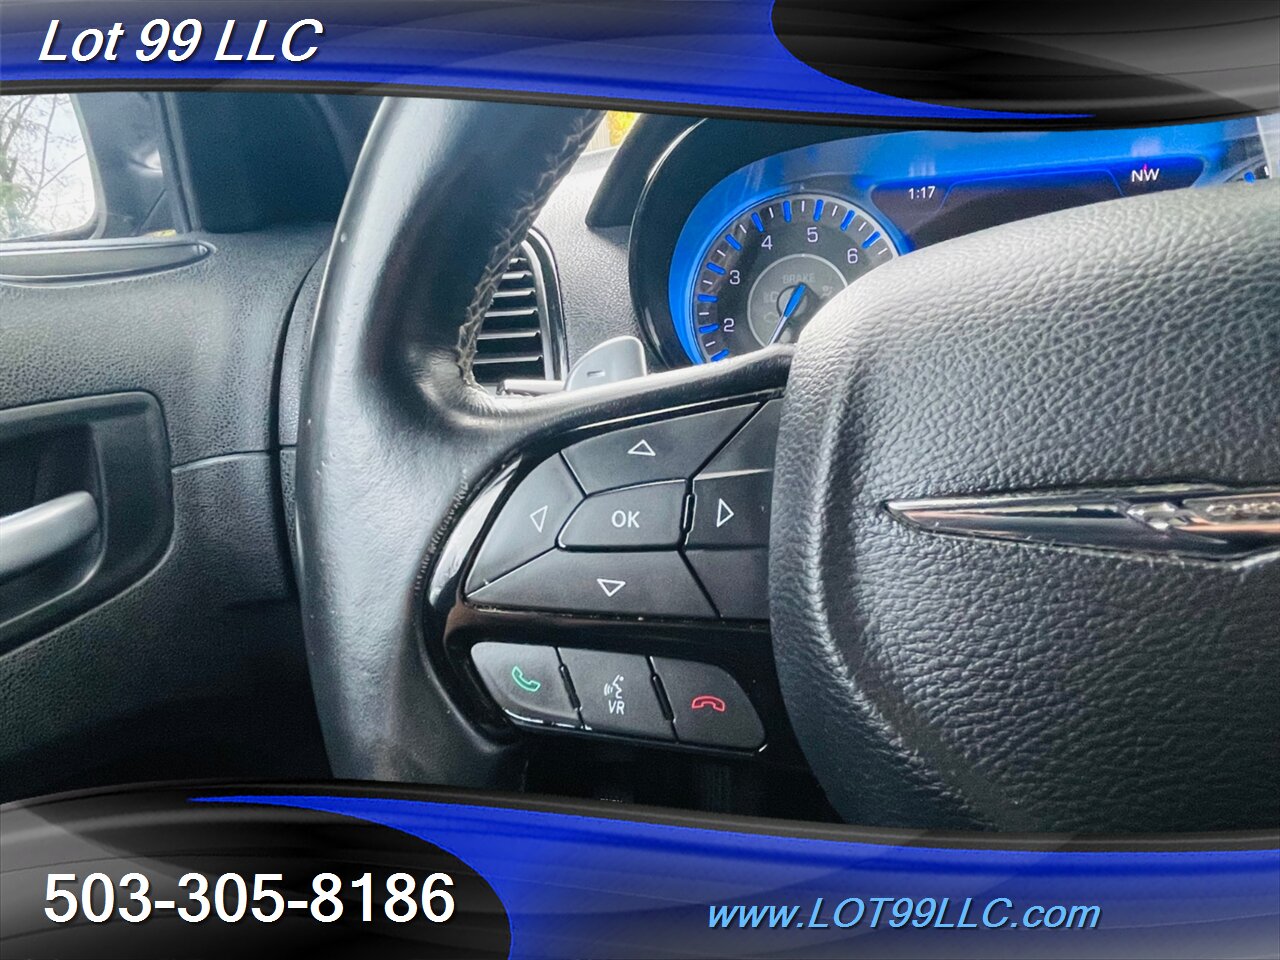 2015 Chrysler 300 Series S Only 86k Miles  Navi Pano HTD Leather 31MPG   - Photo 25 - Milwaukie, OR 97267